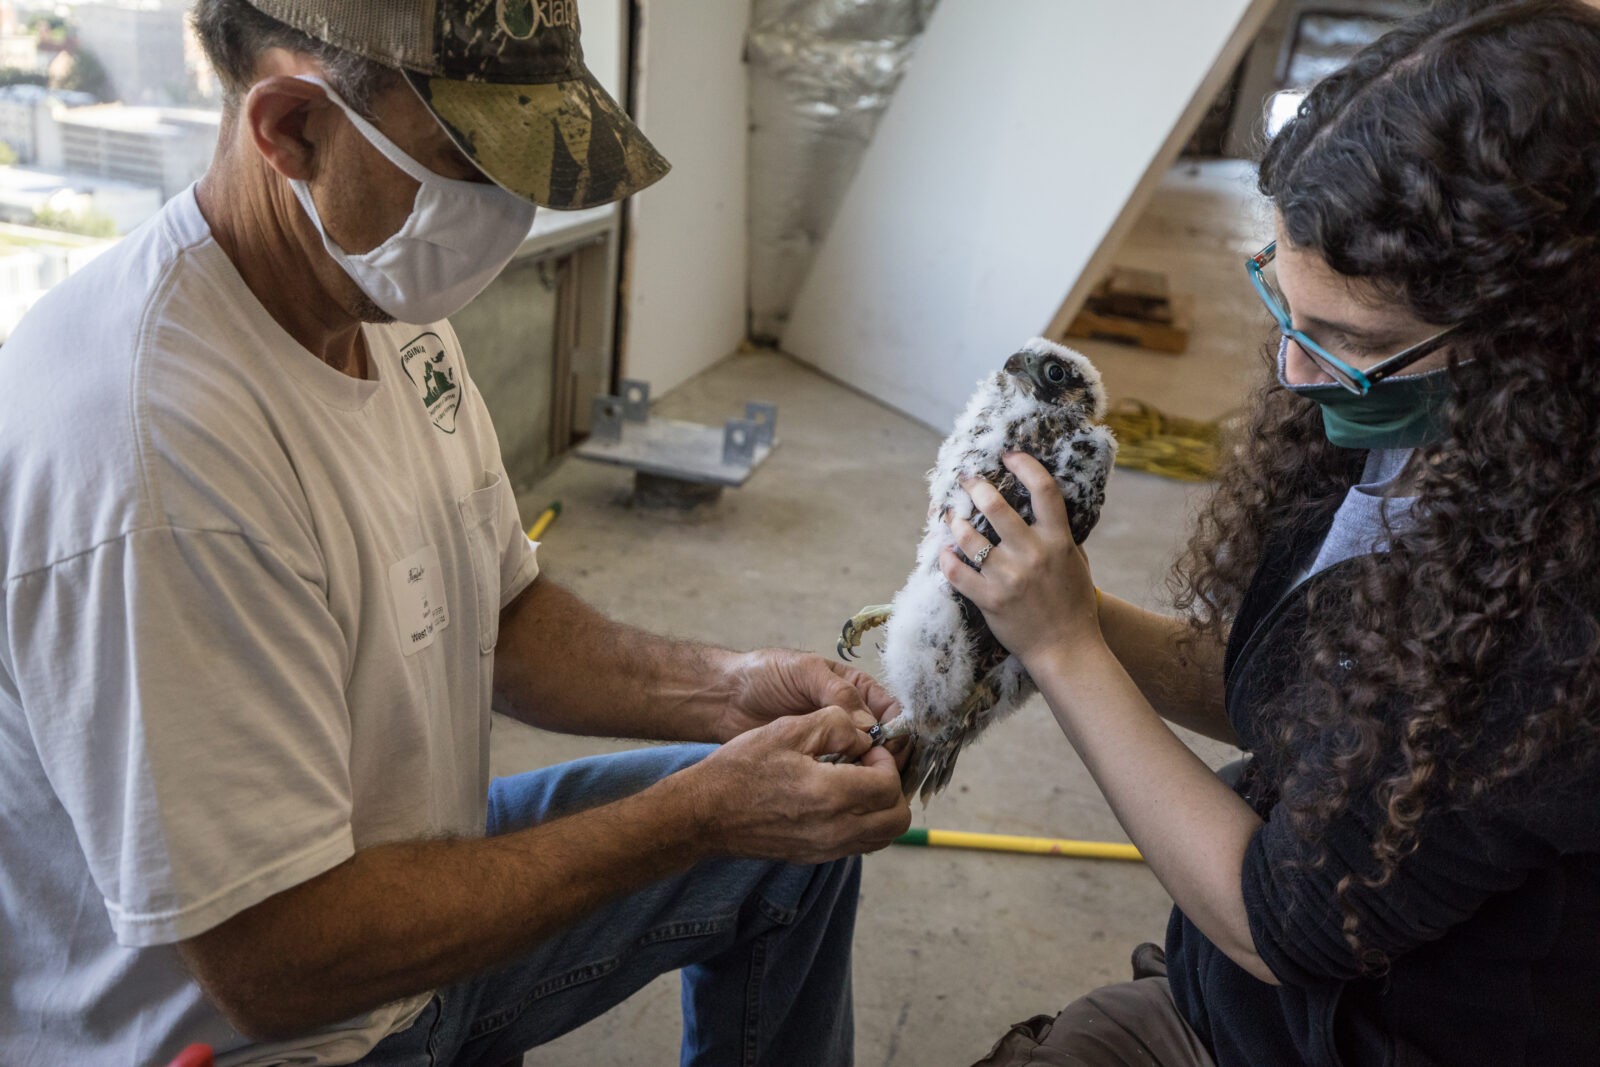 Biologists equipping the black over green field-readable band on the female chick's leg